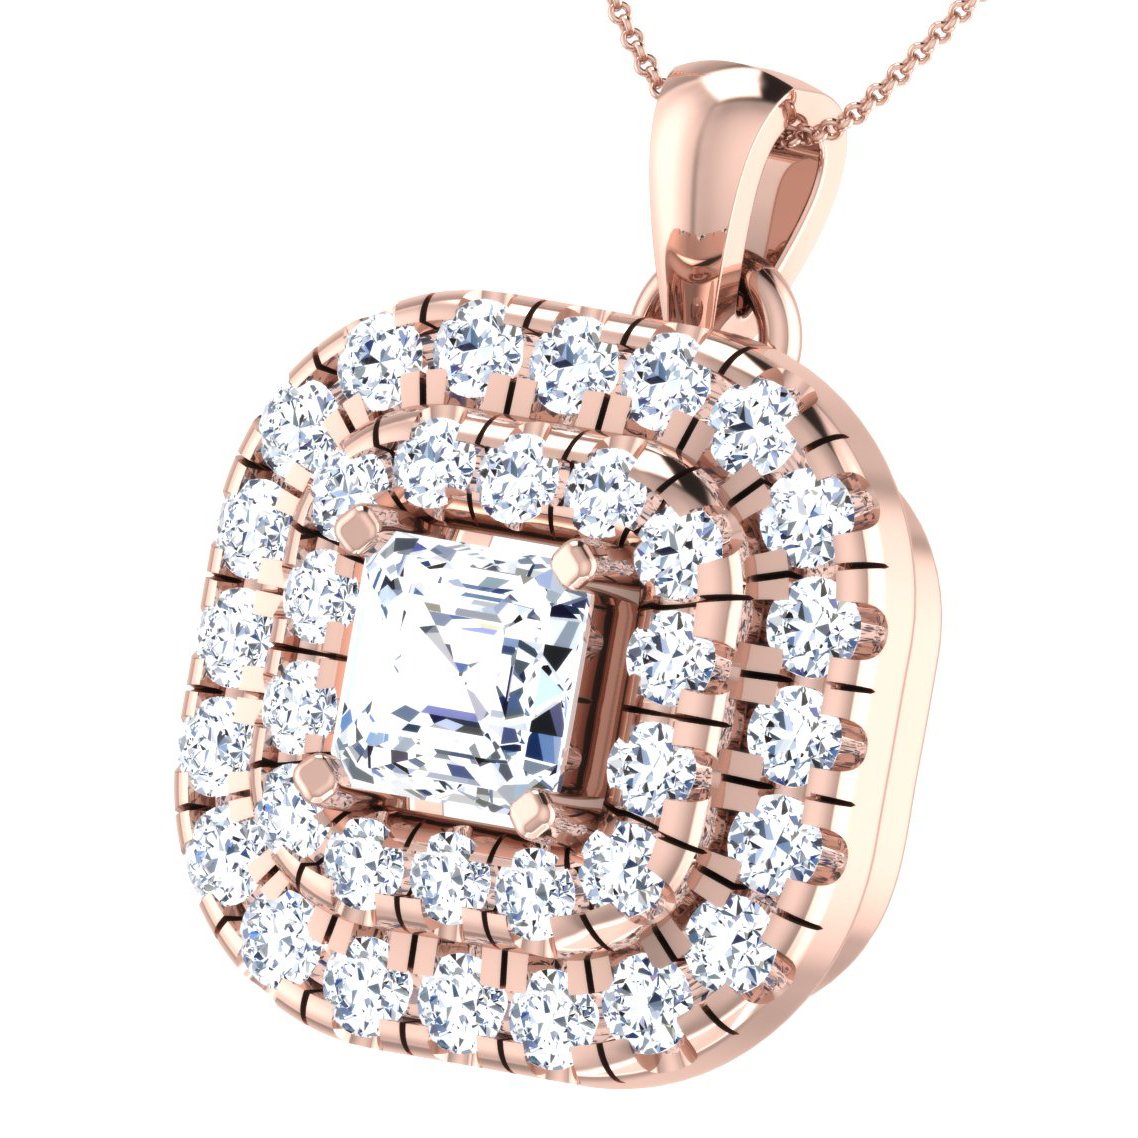 Stunning Pavilion Diamond Pendant In Pure Gold By Dhanji Jewels